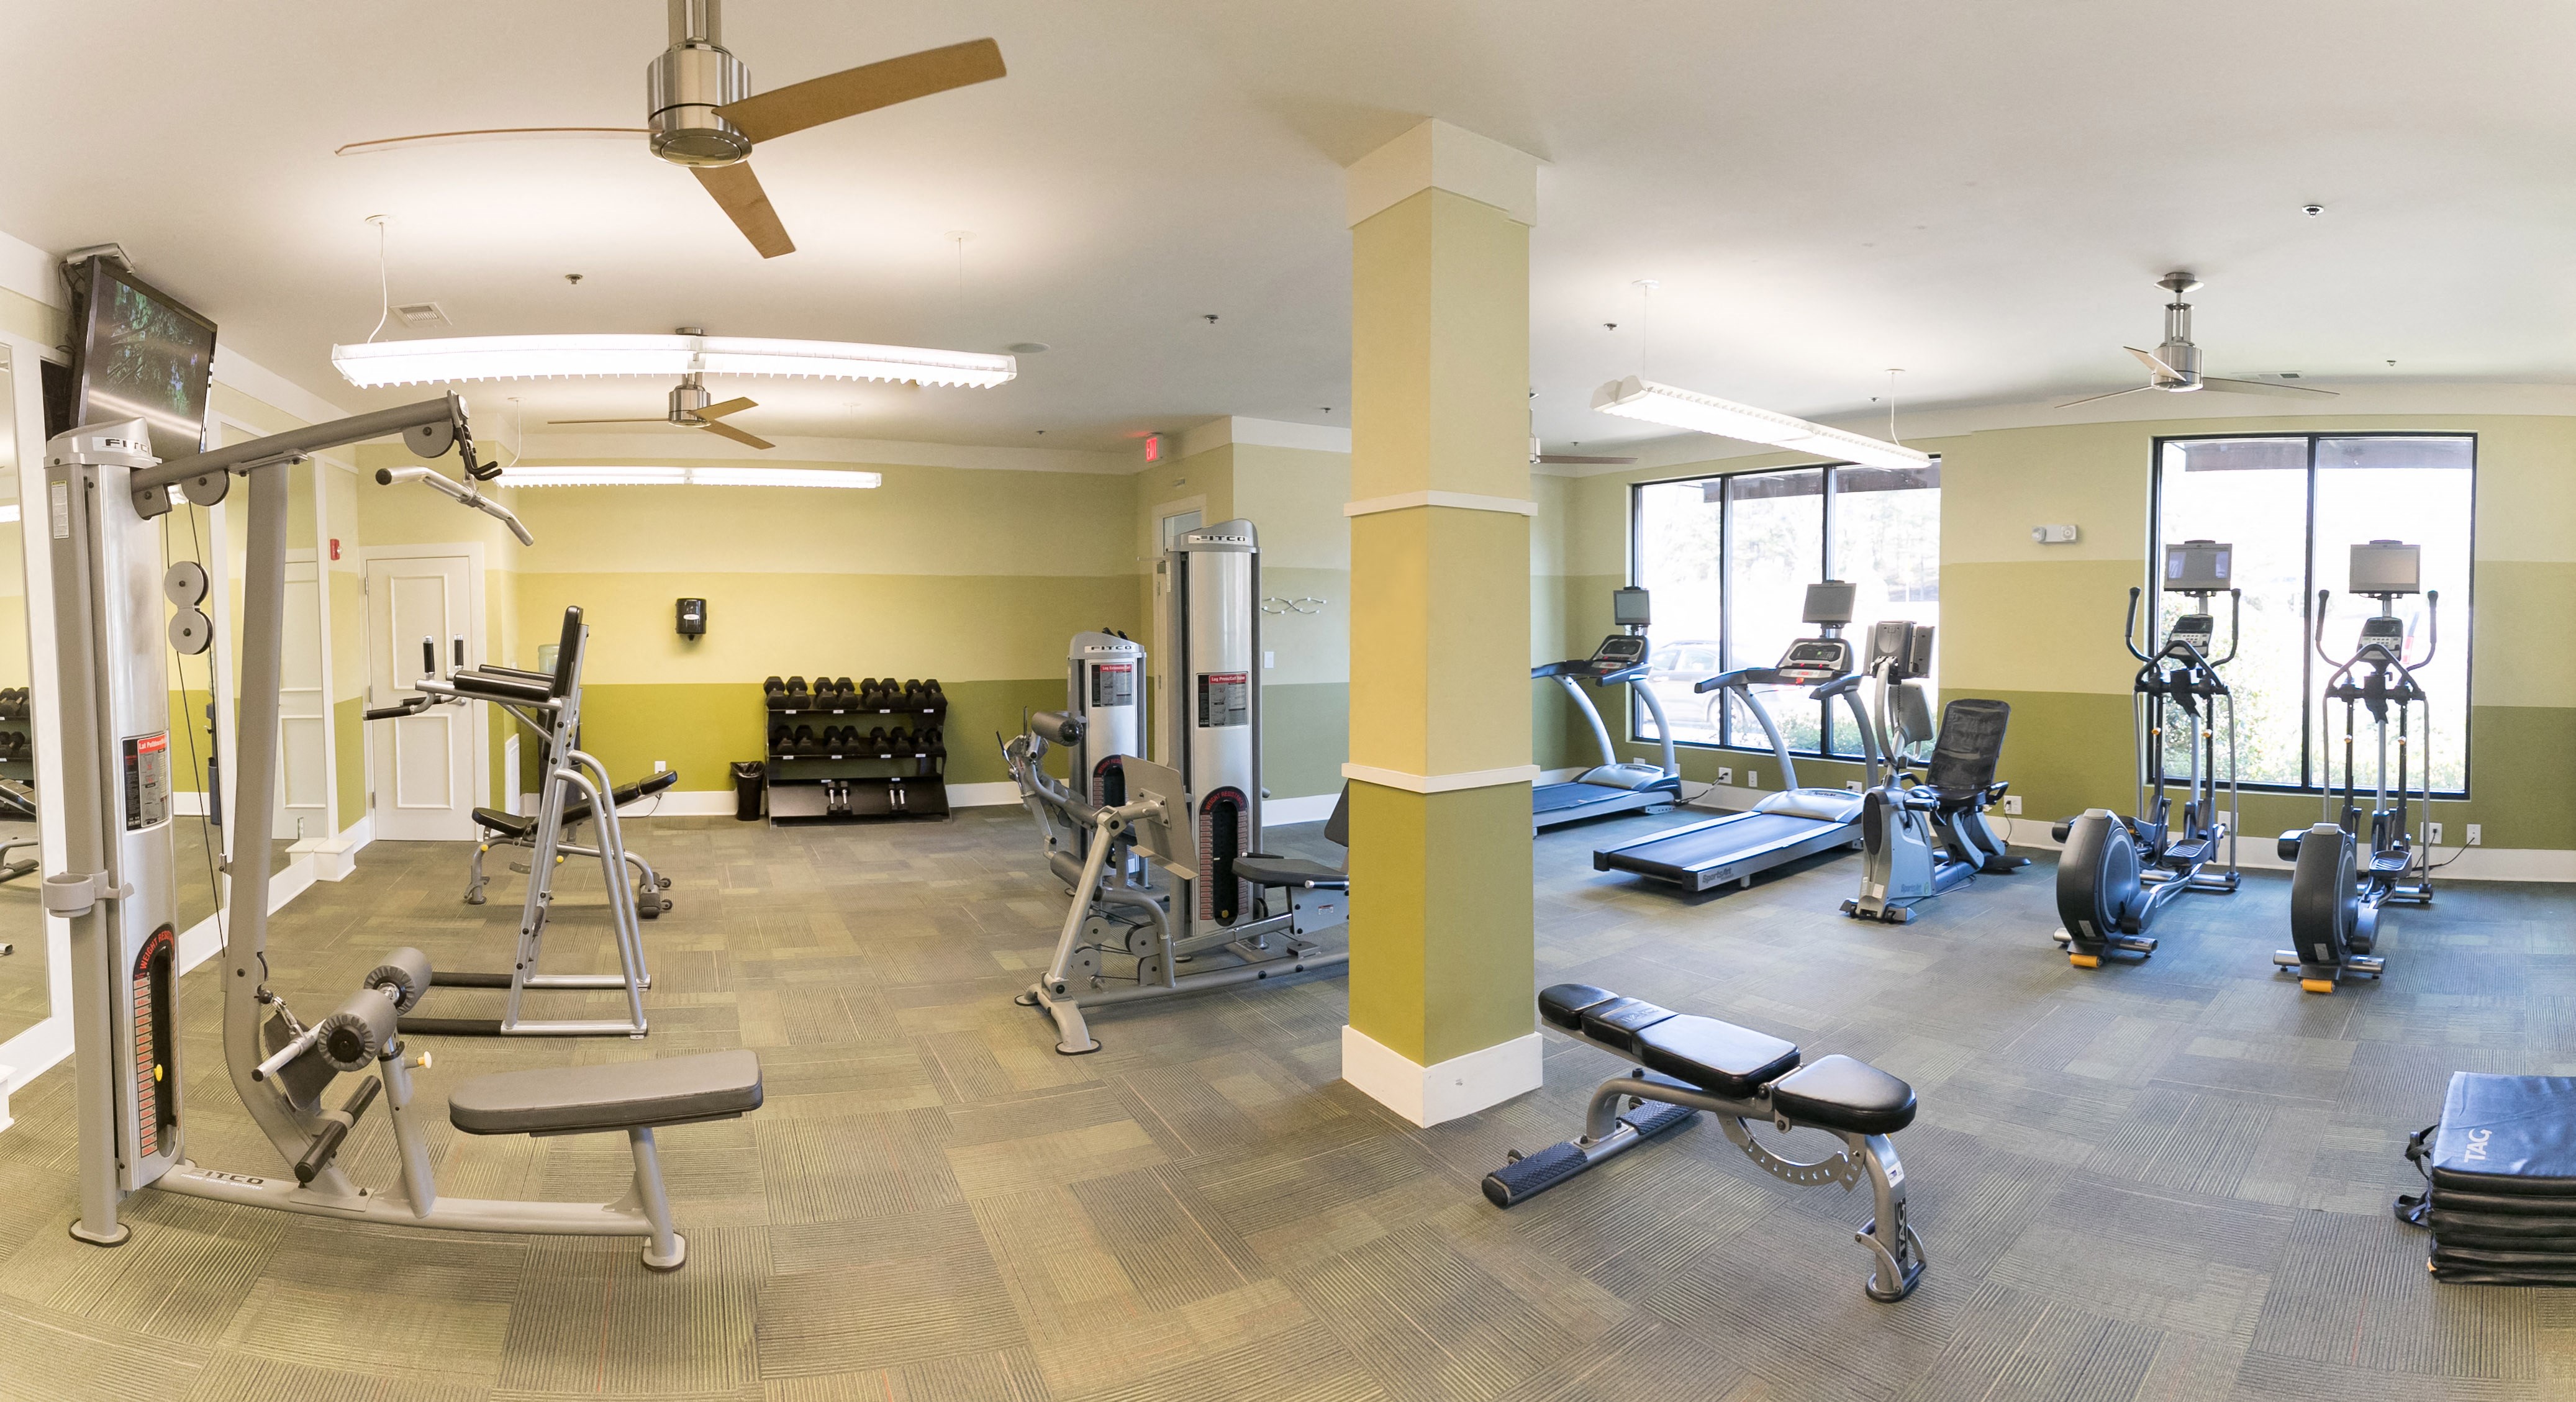 Indoor spacious fitness center with multiple workout equipment.